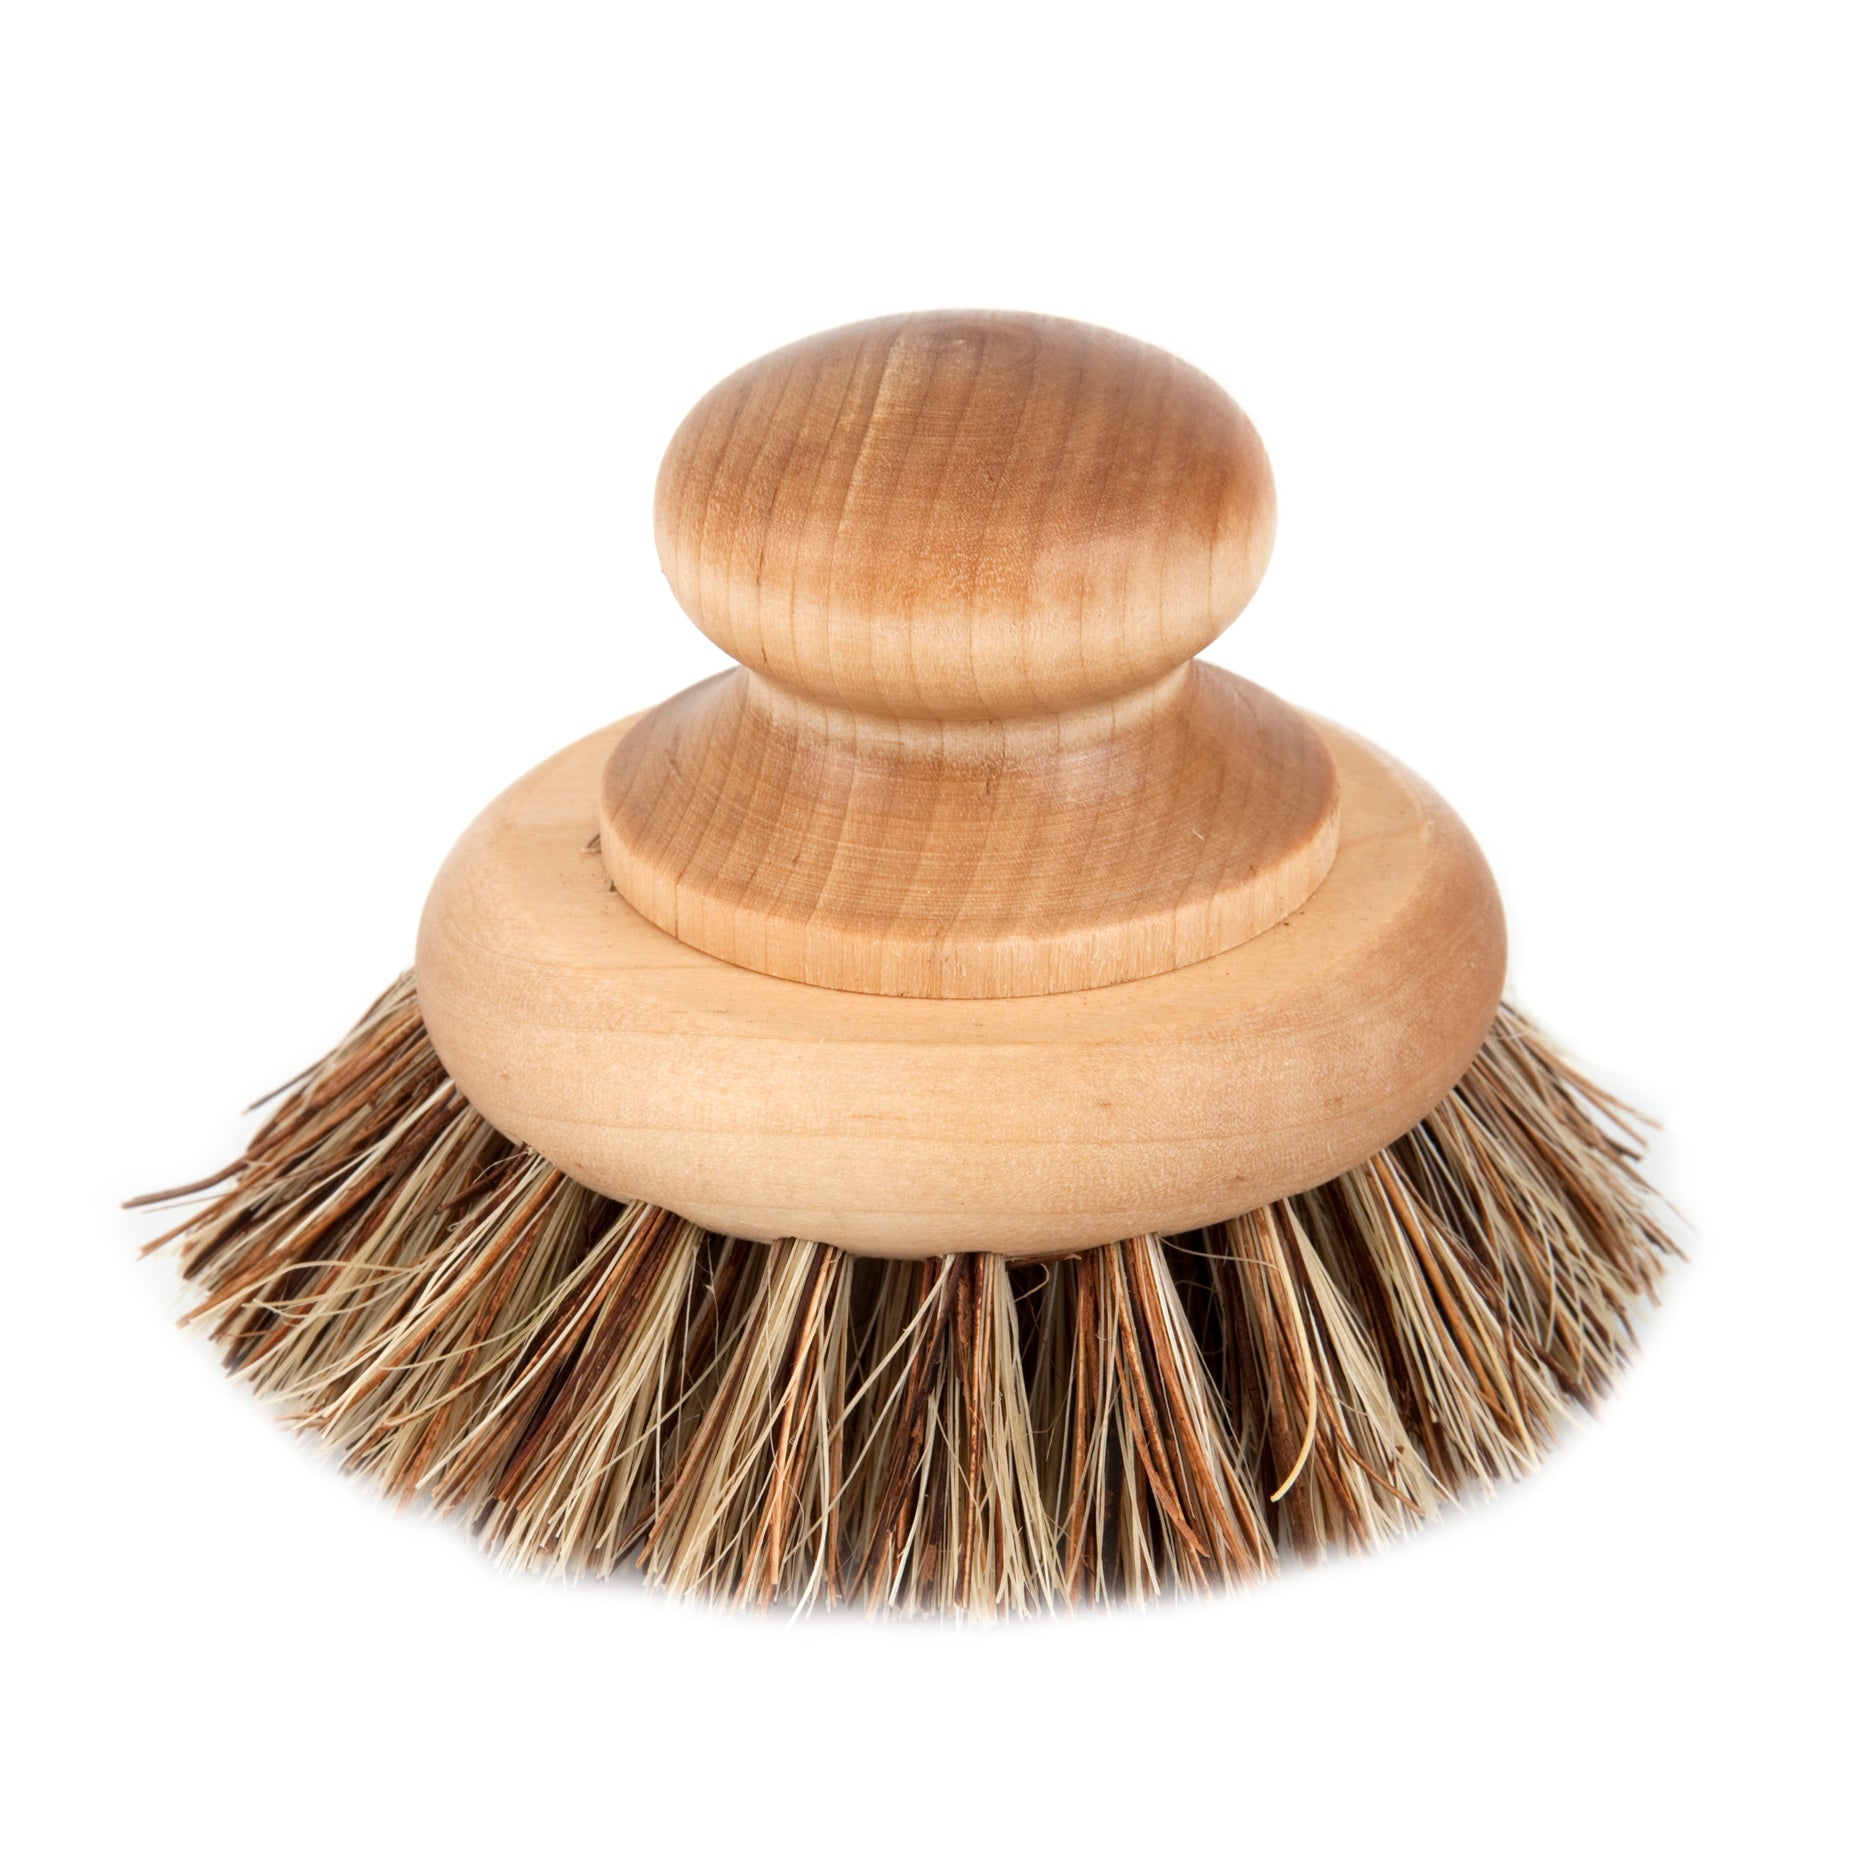 Sturdy brush for pots and pans with round maple handle and Tampico and Bassine bristles